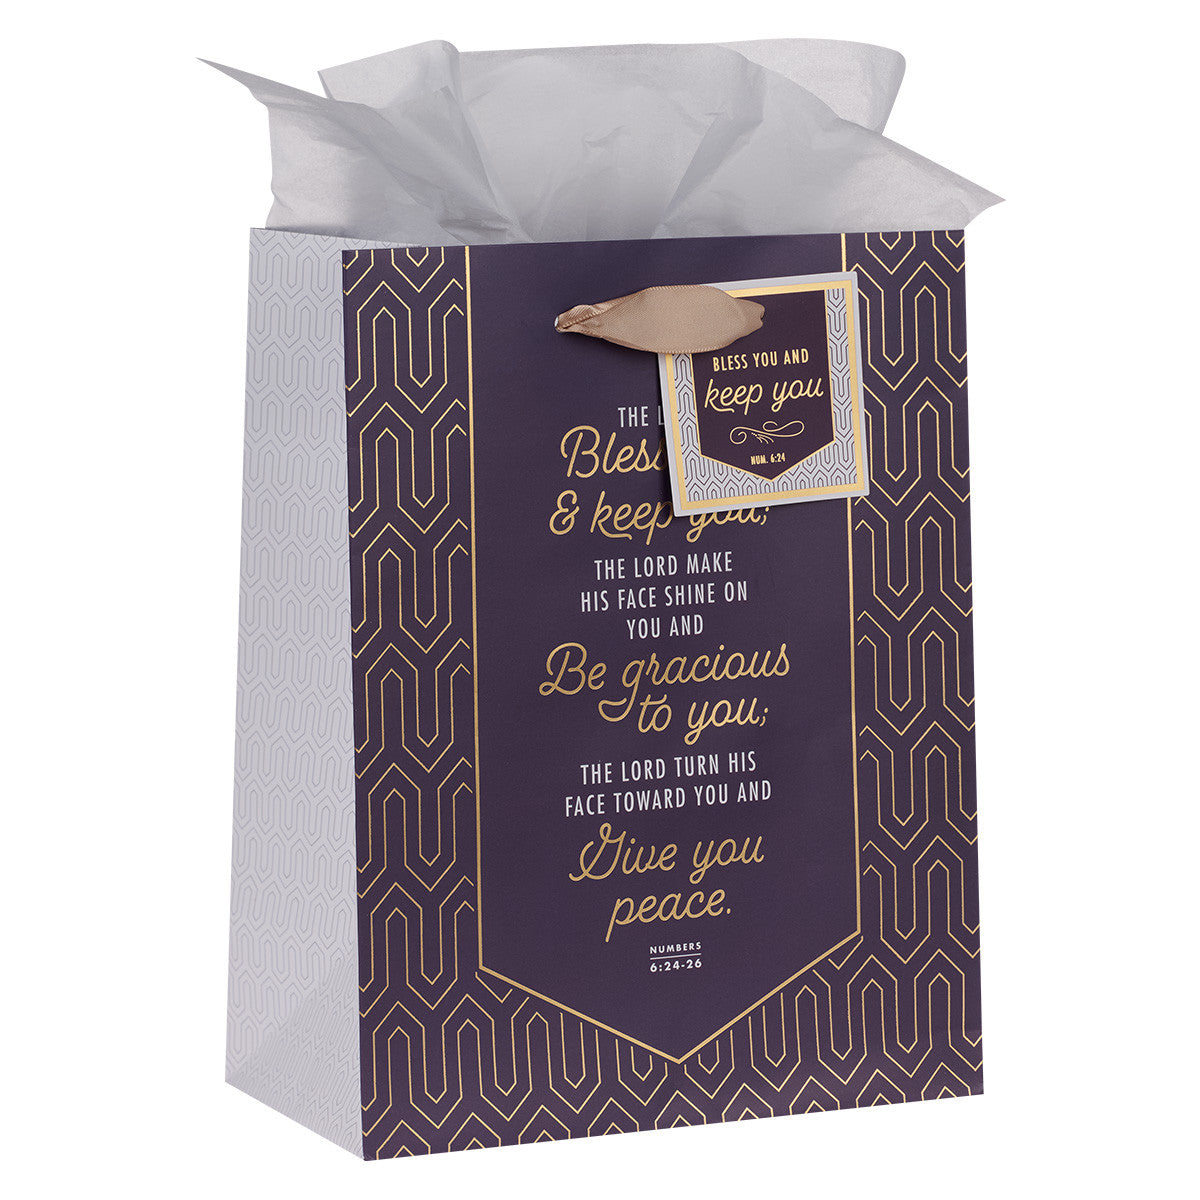 Bless You and Keep You Geometric Purple Medium Gift Bag - Numbers 6:24-26 - The Christian Gift Company